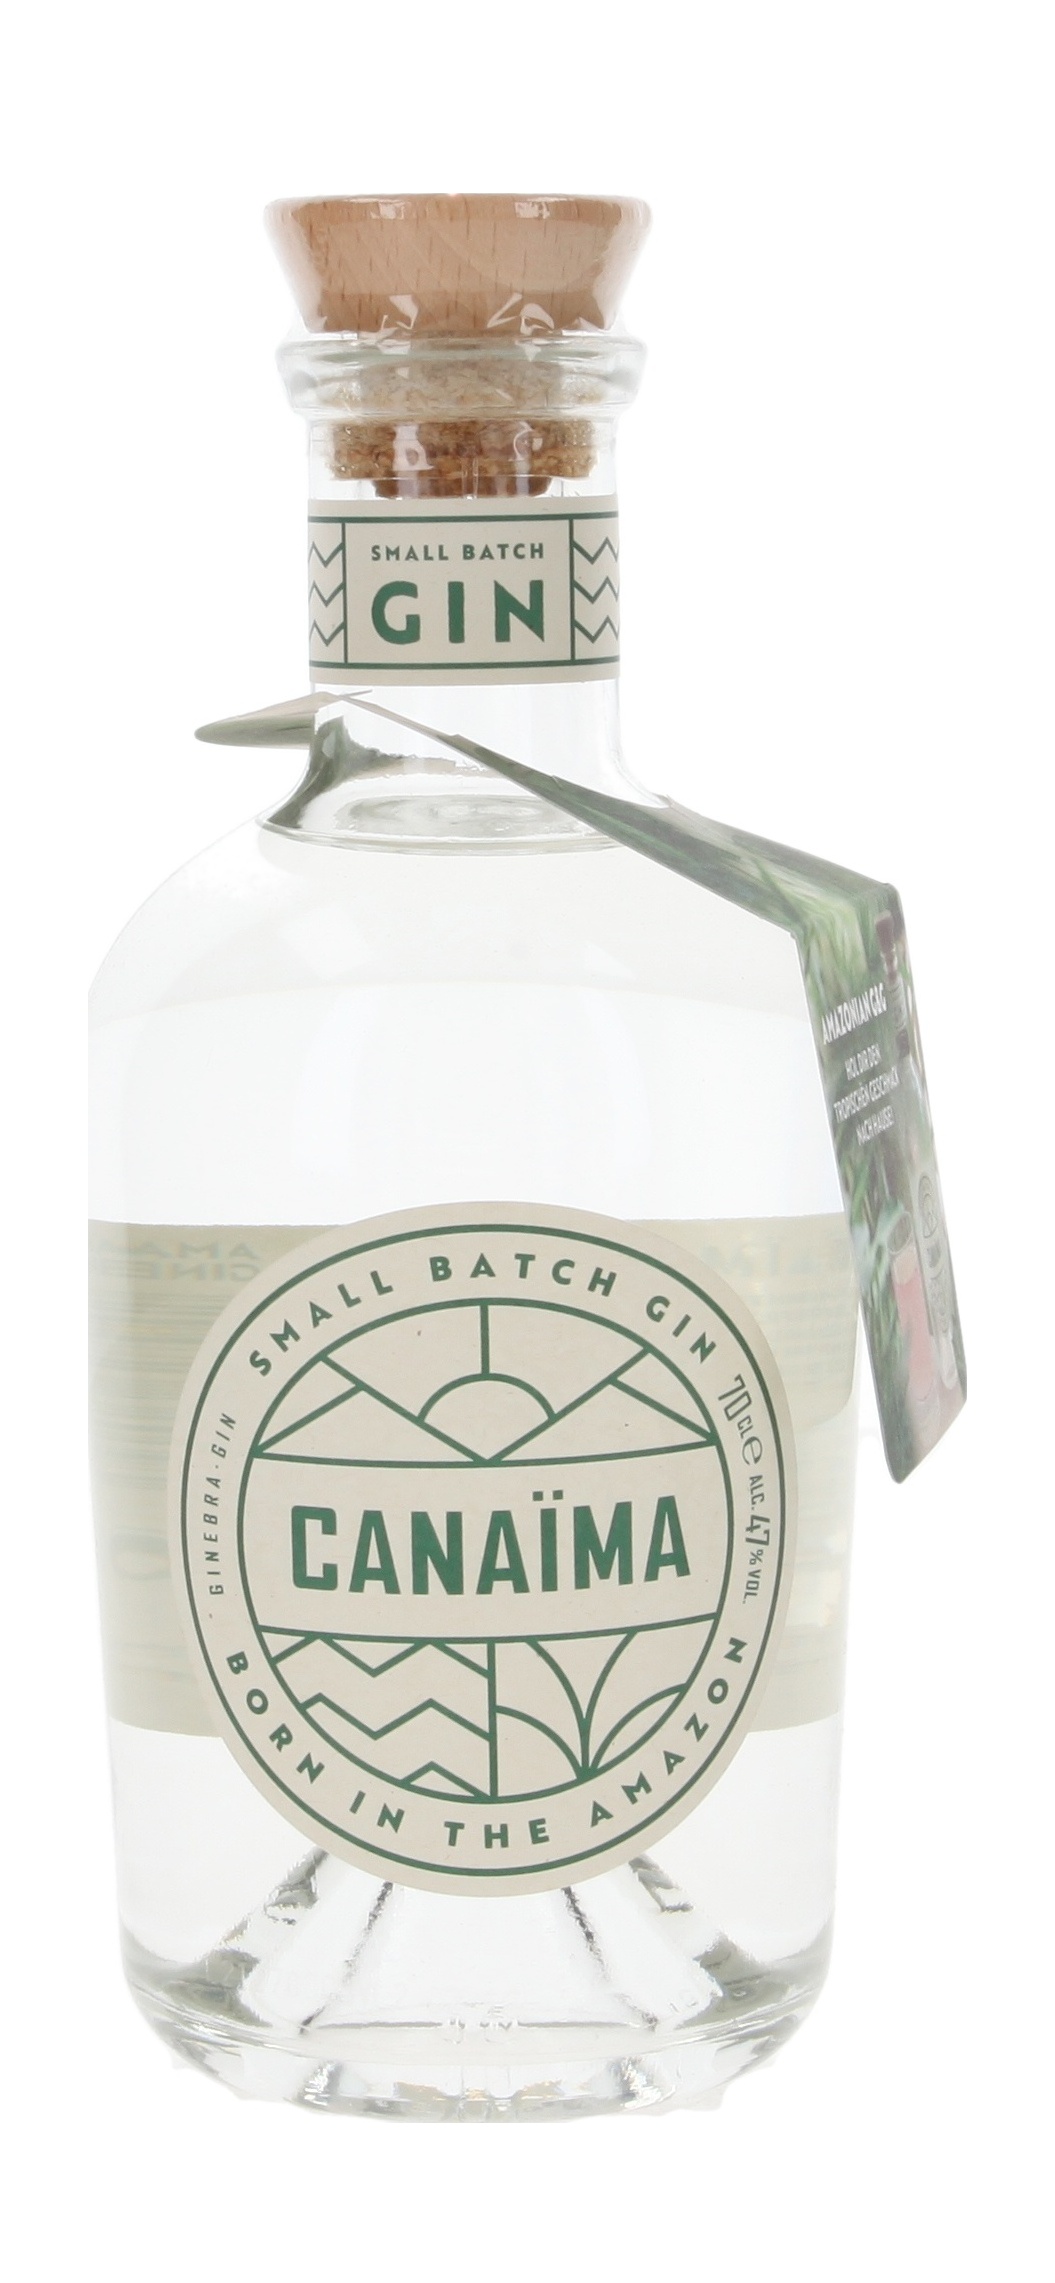 Canaima To store the online Batch » | Gin Small Whisky.de